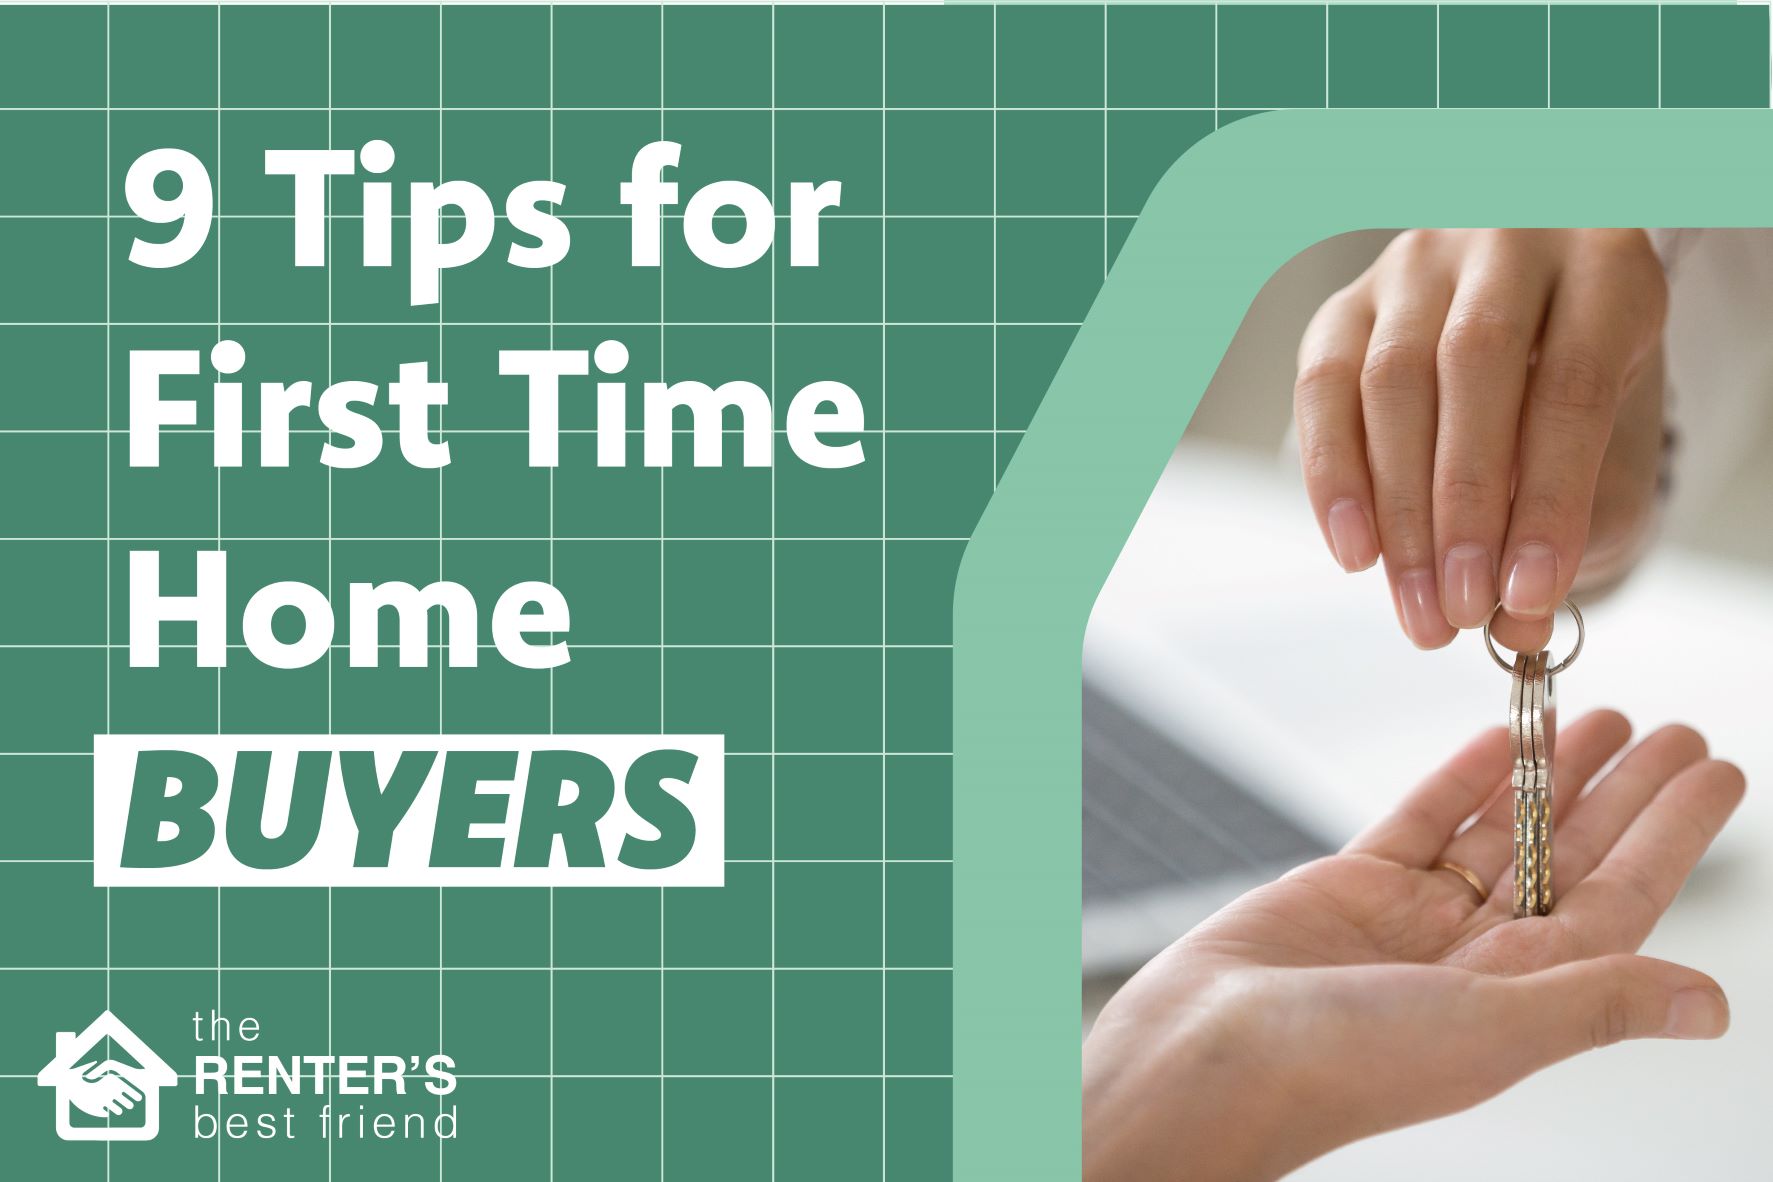 9 tips for first time home buyers